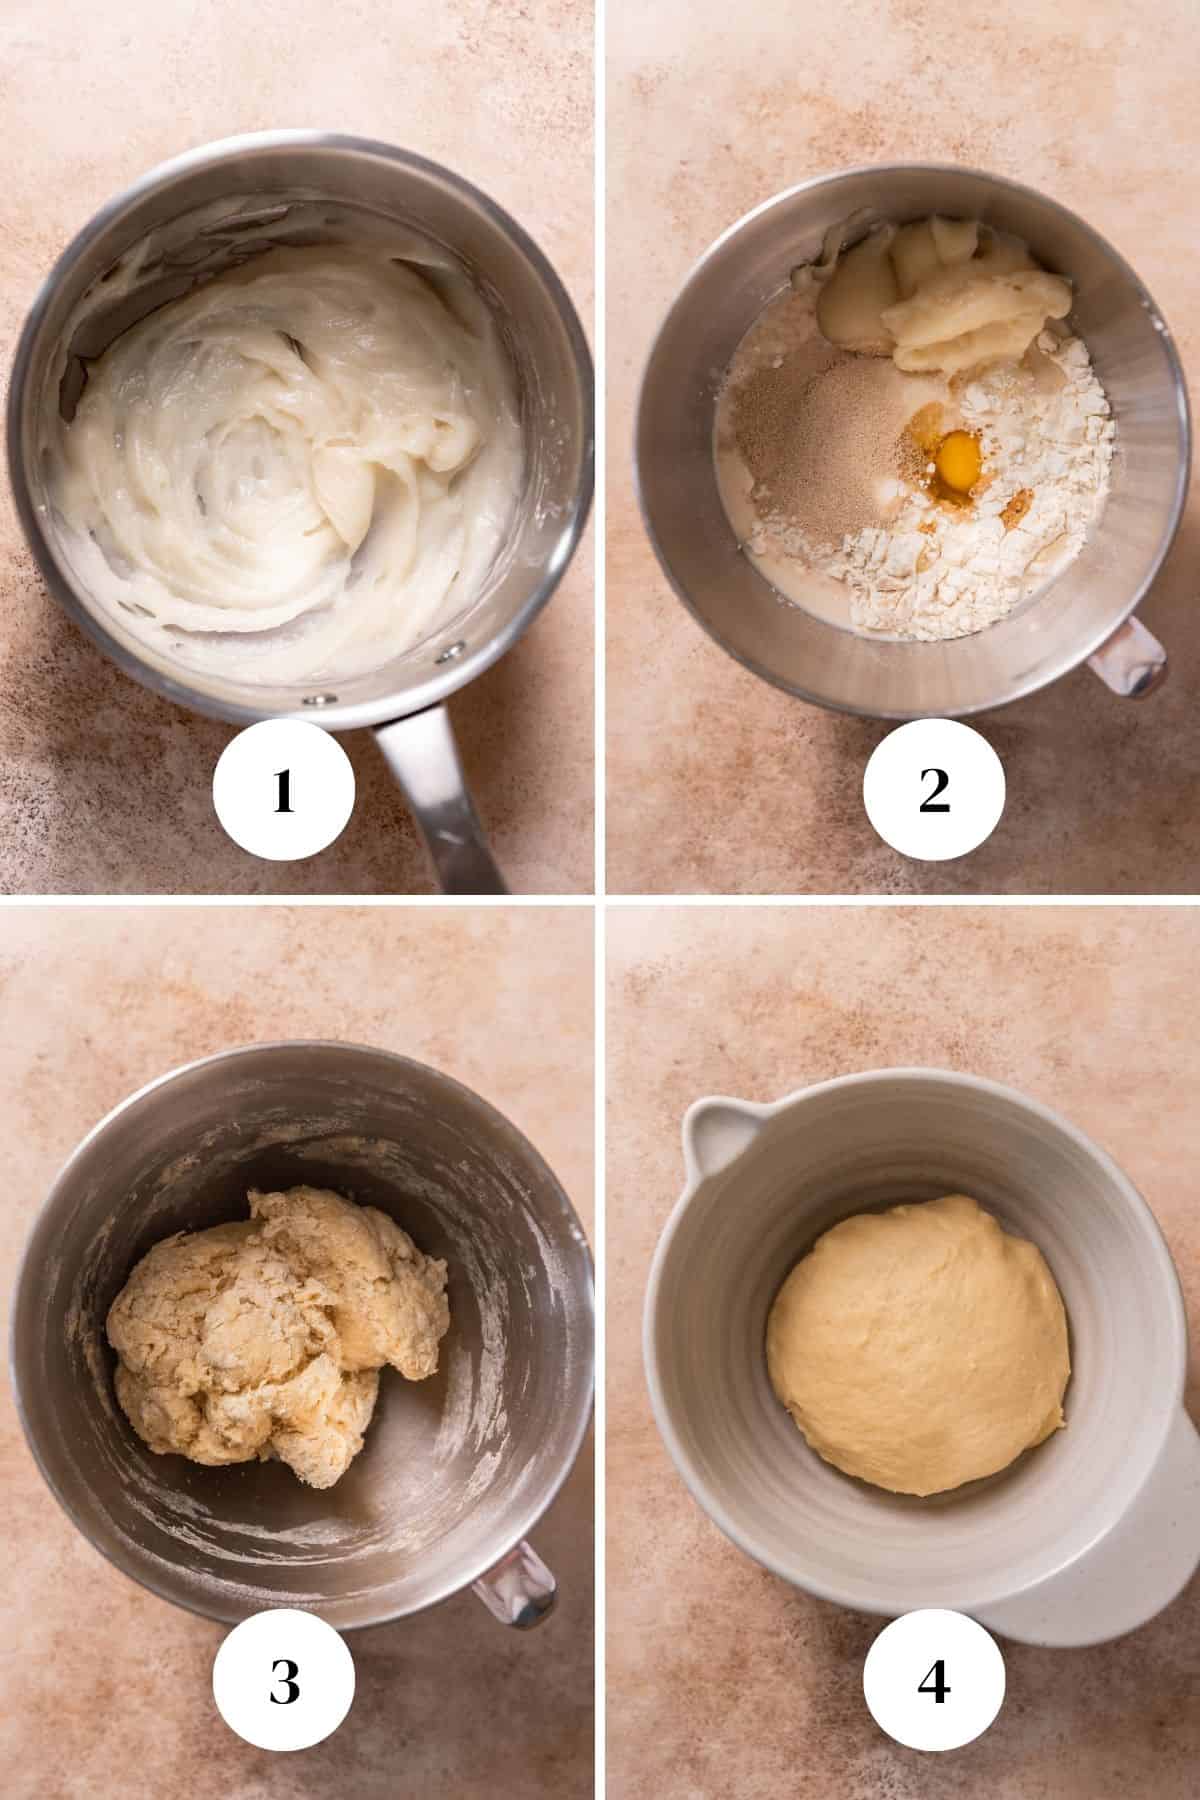 A collage of the steps for making cinnamon roll dough.